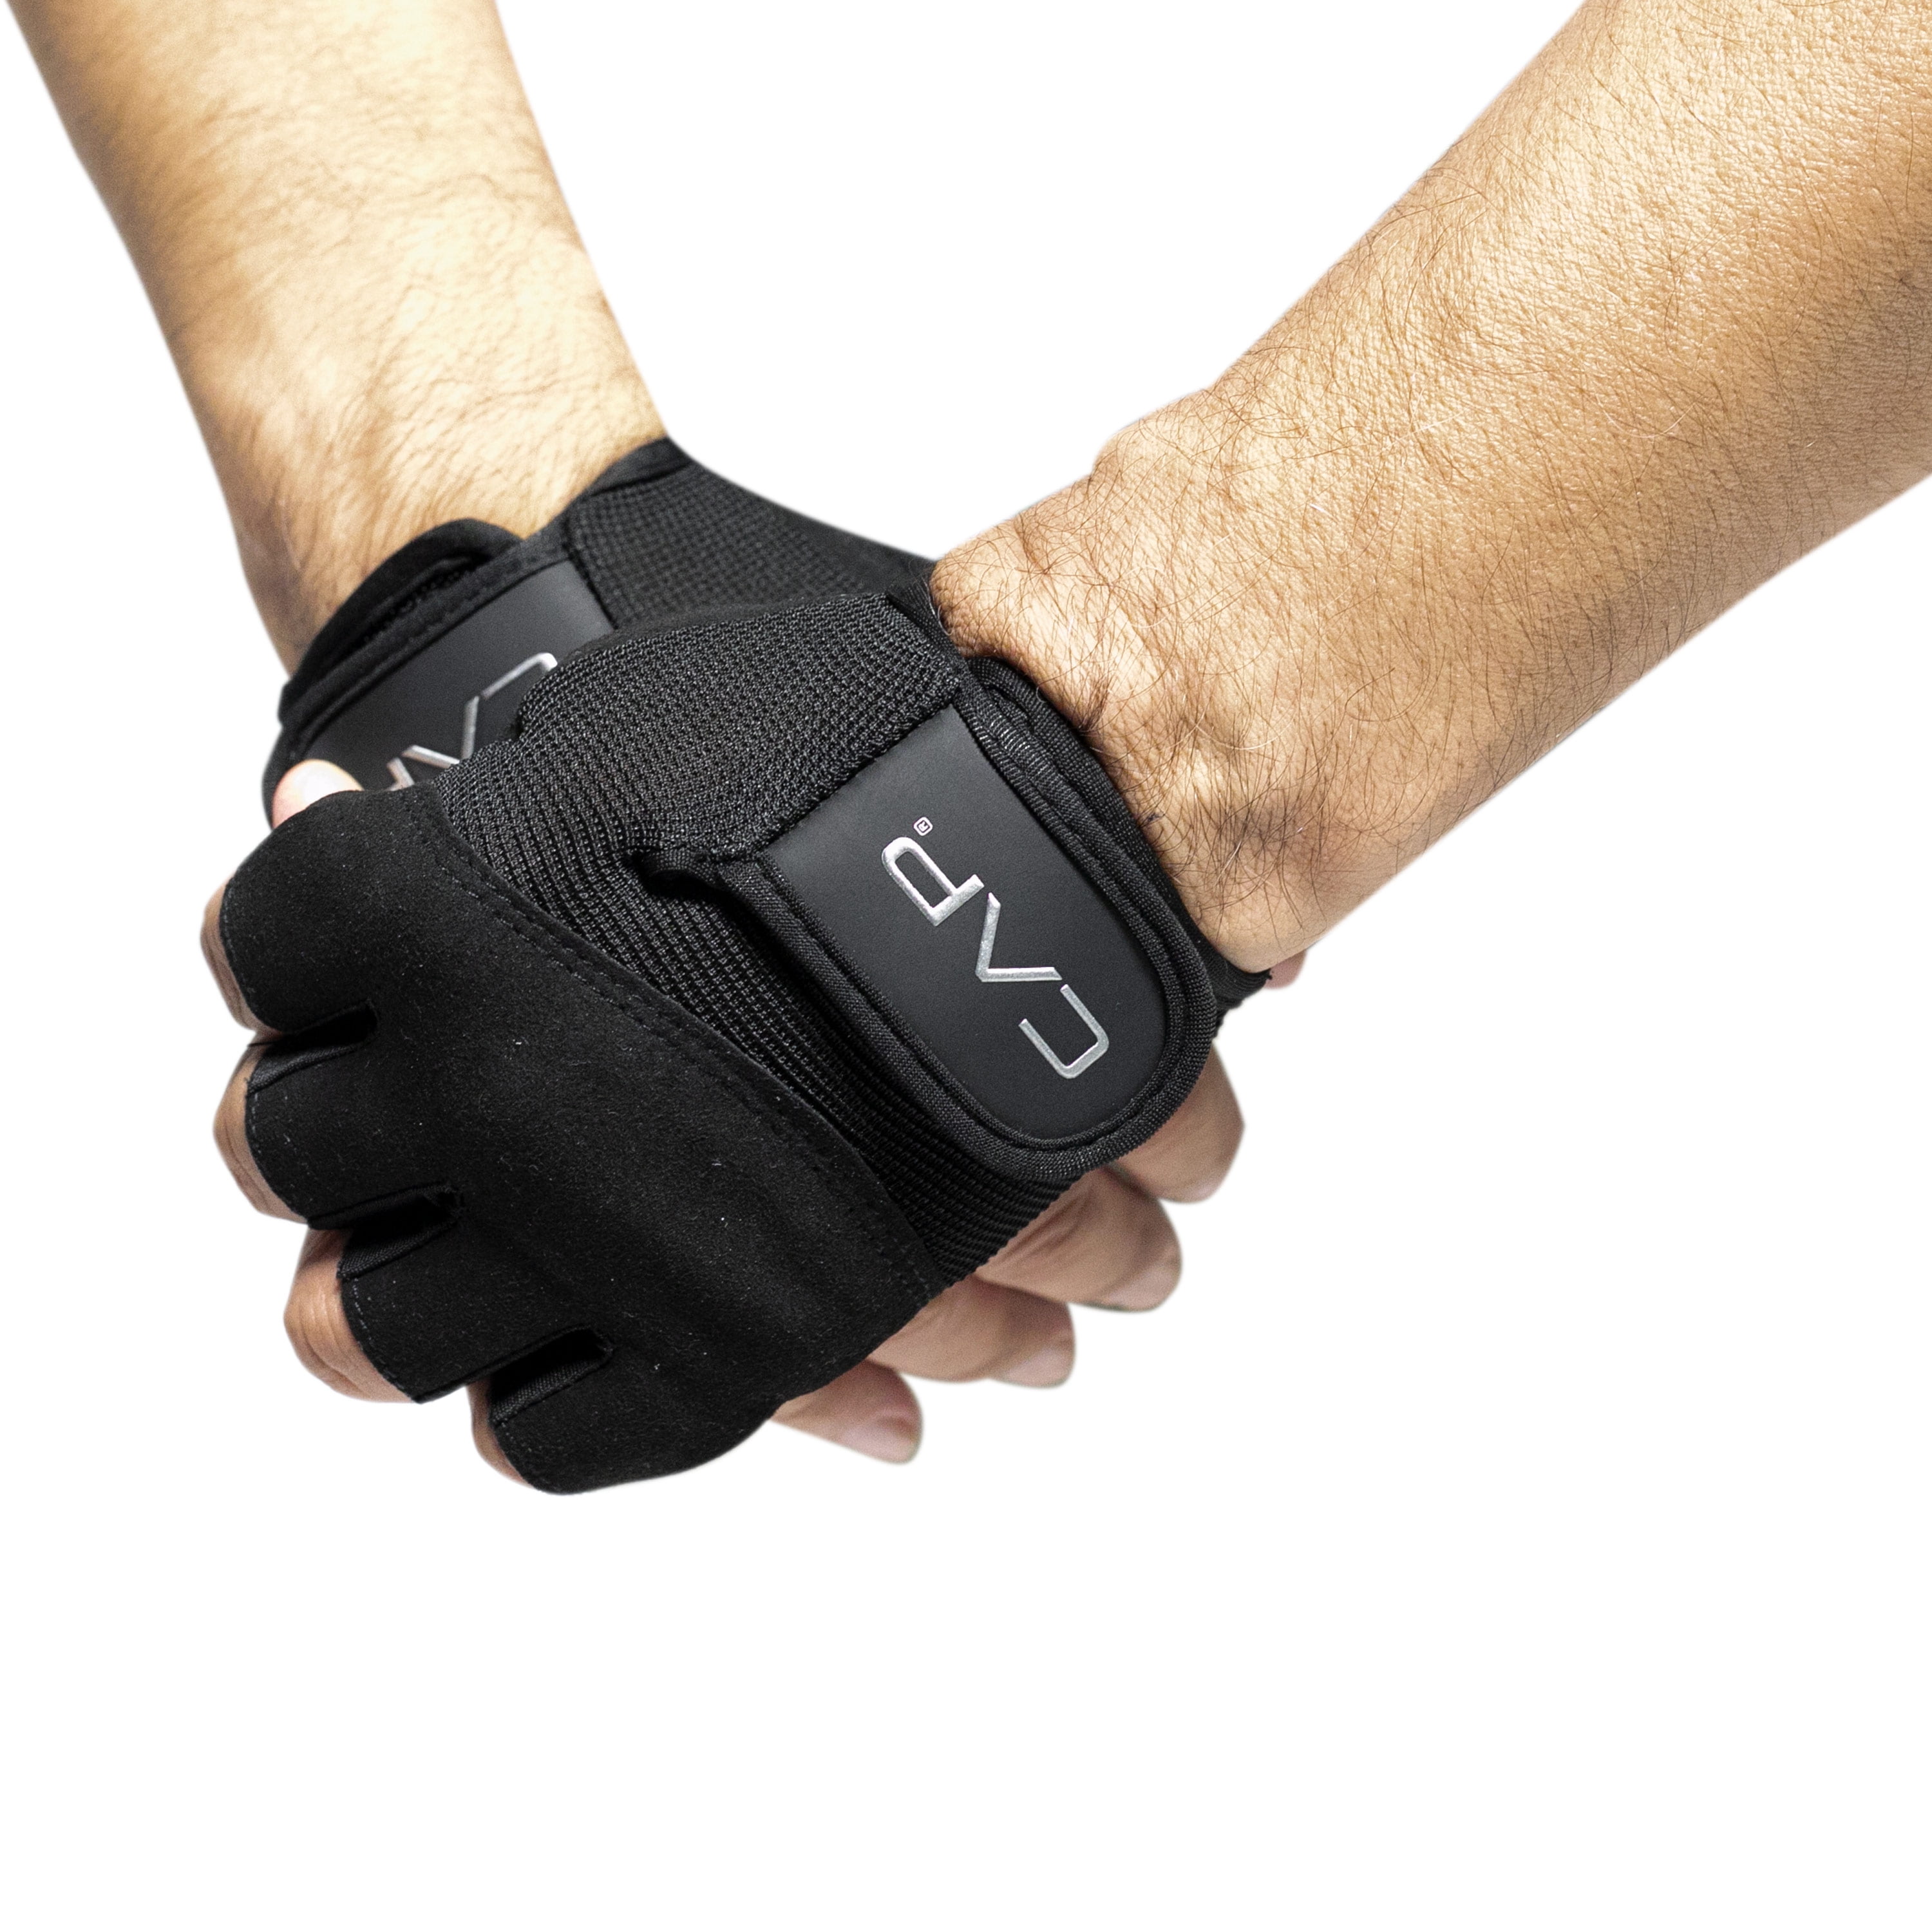 CAP Weight Lifting Gloves Leather Gym Powerlifting Bodybuilding Fitness Training 